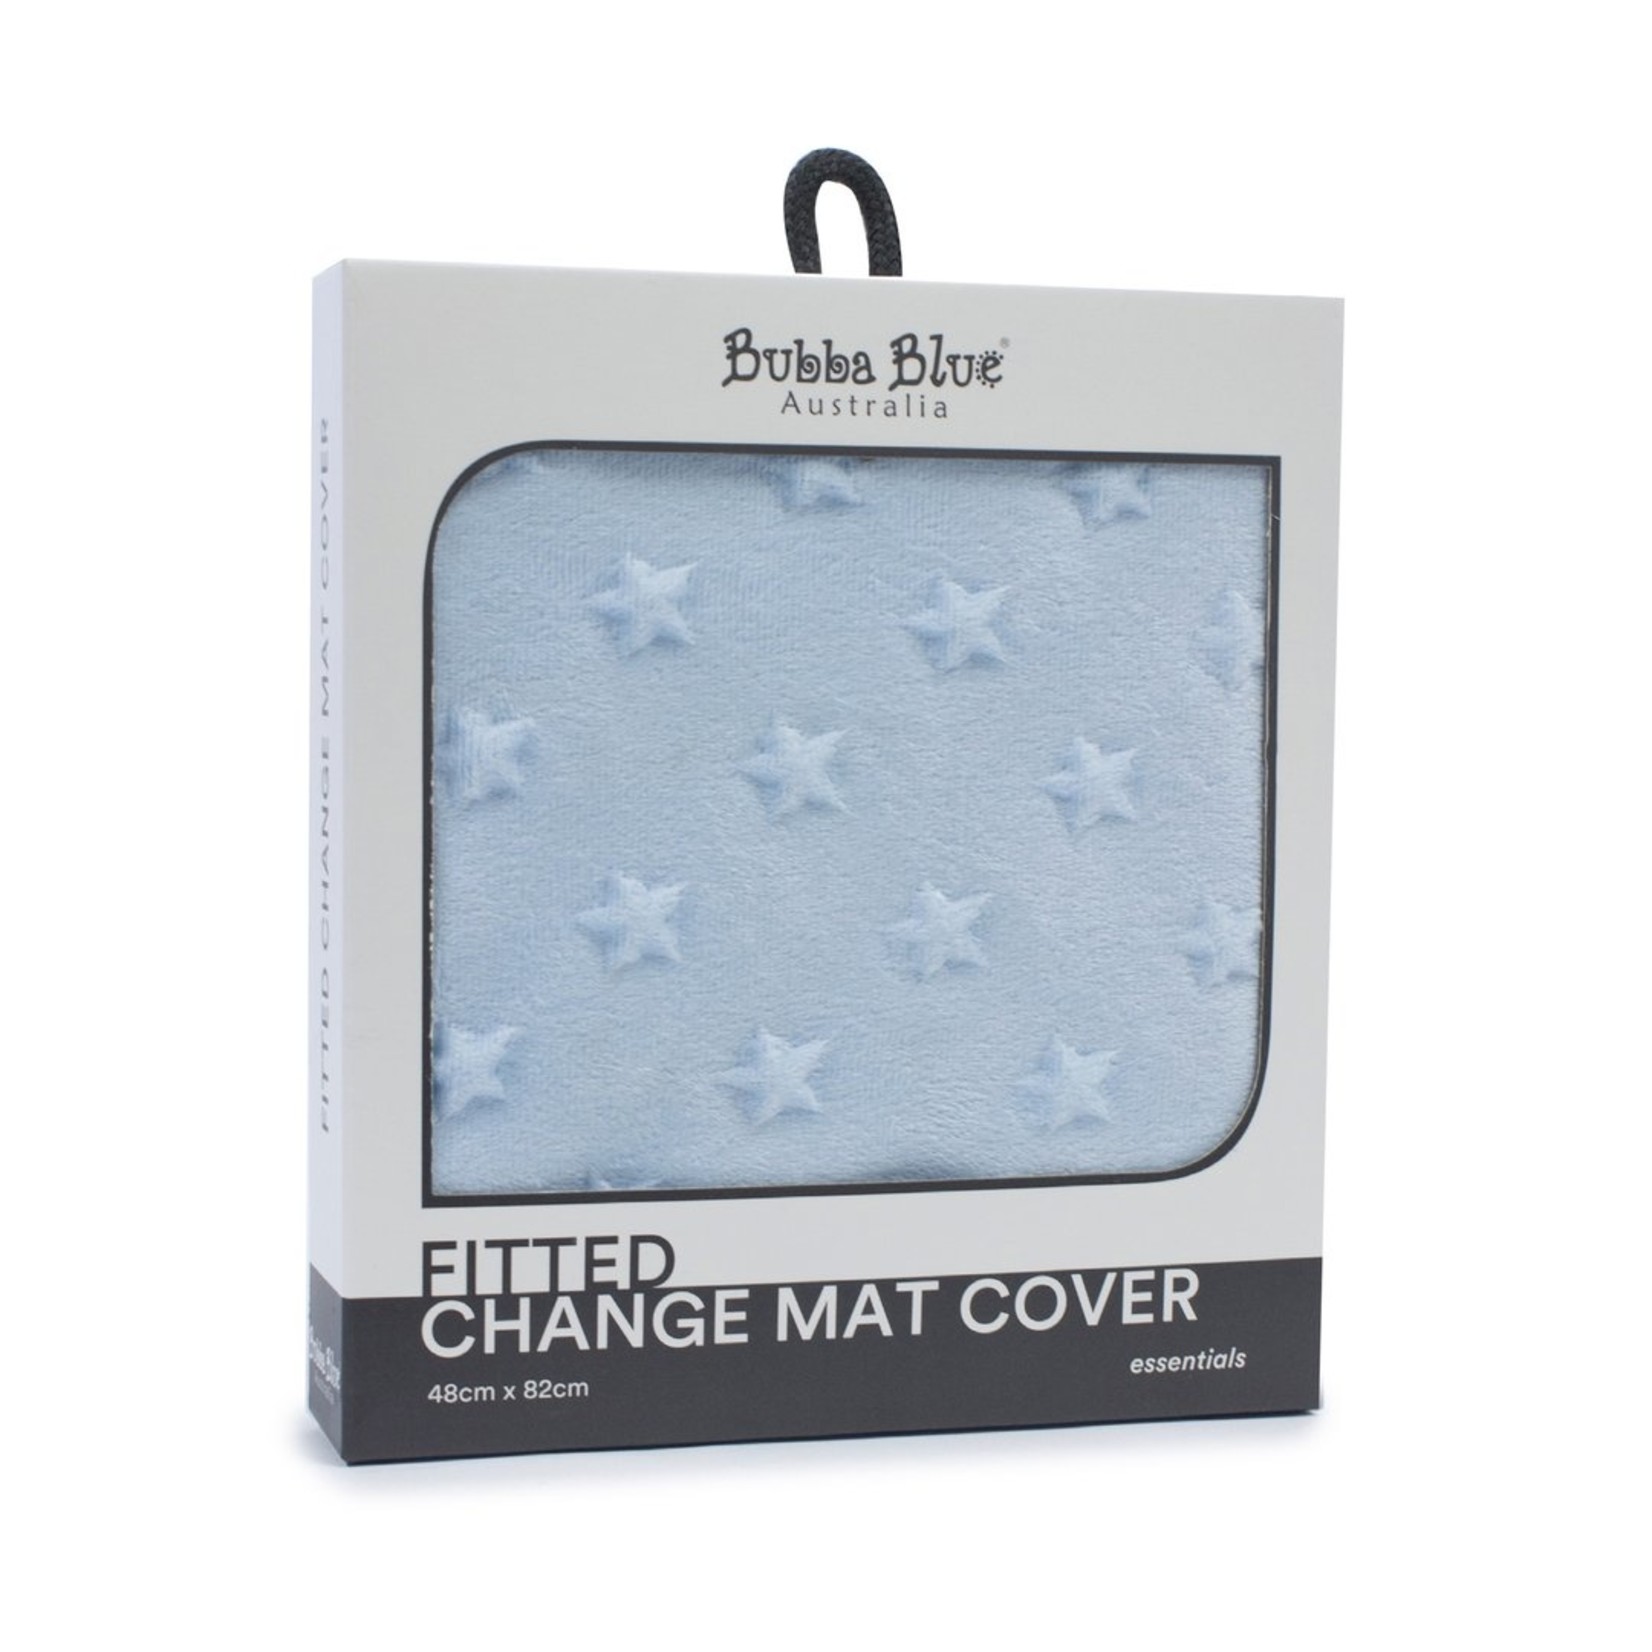 Bubba Blue Fitted Change Mat Cover - Star